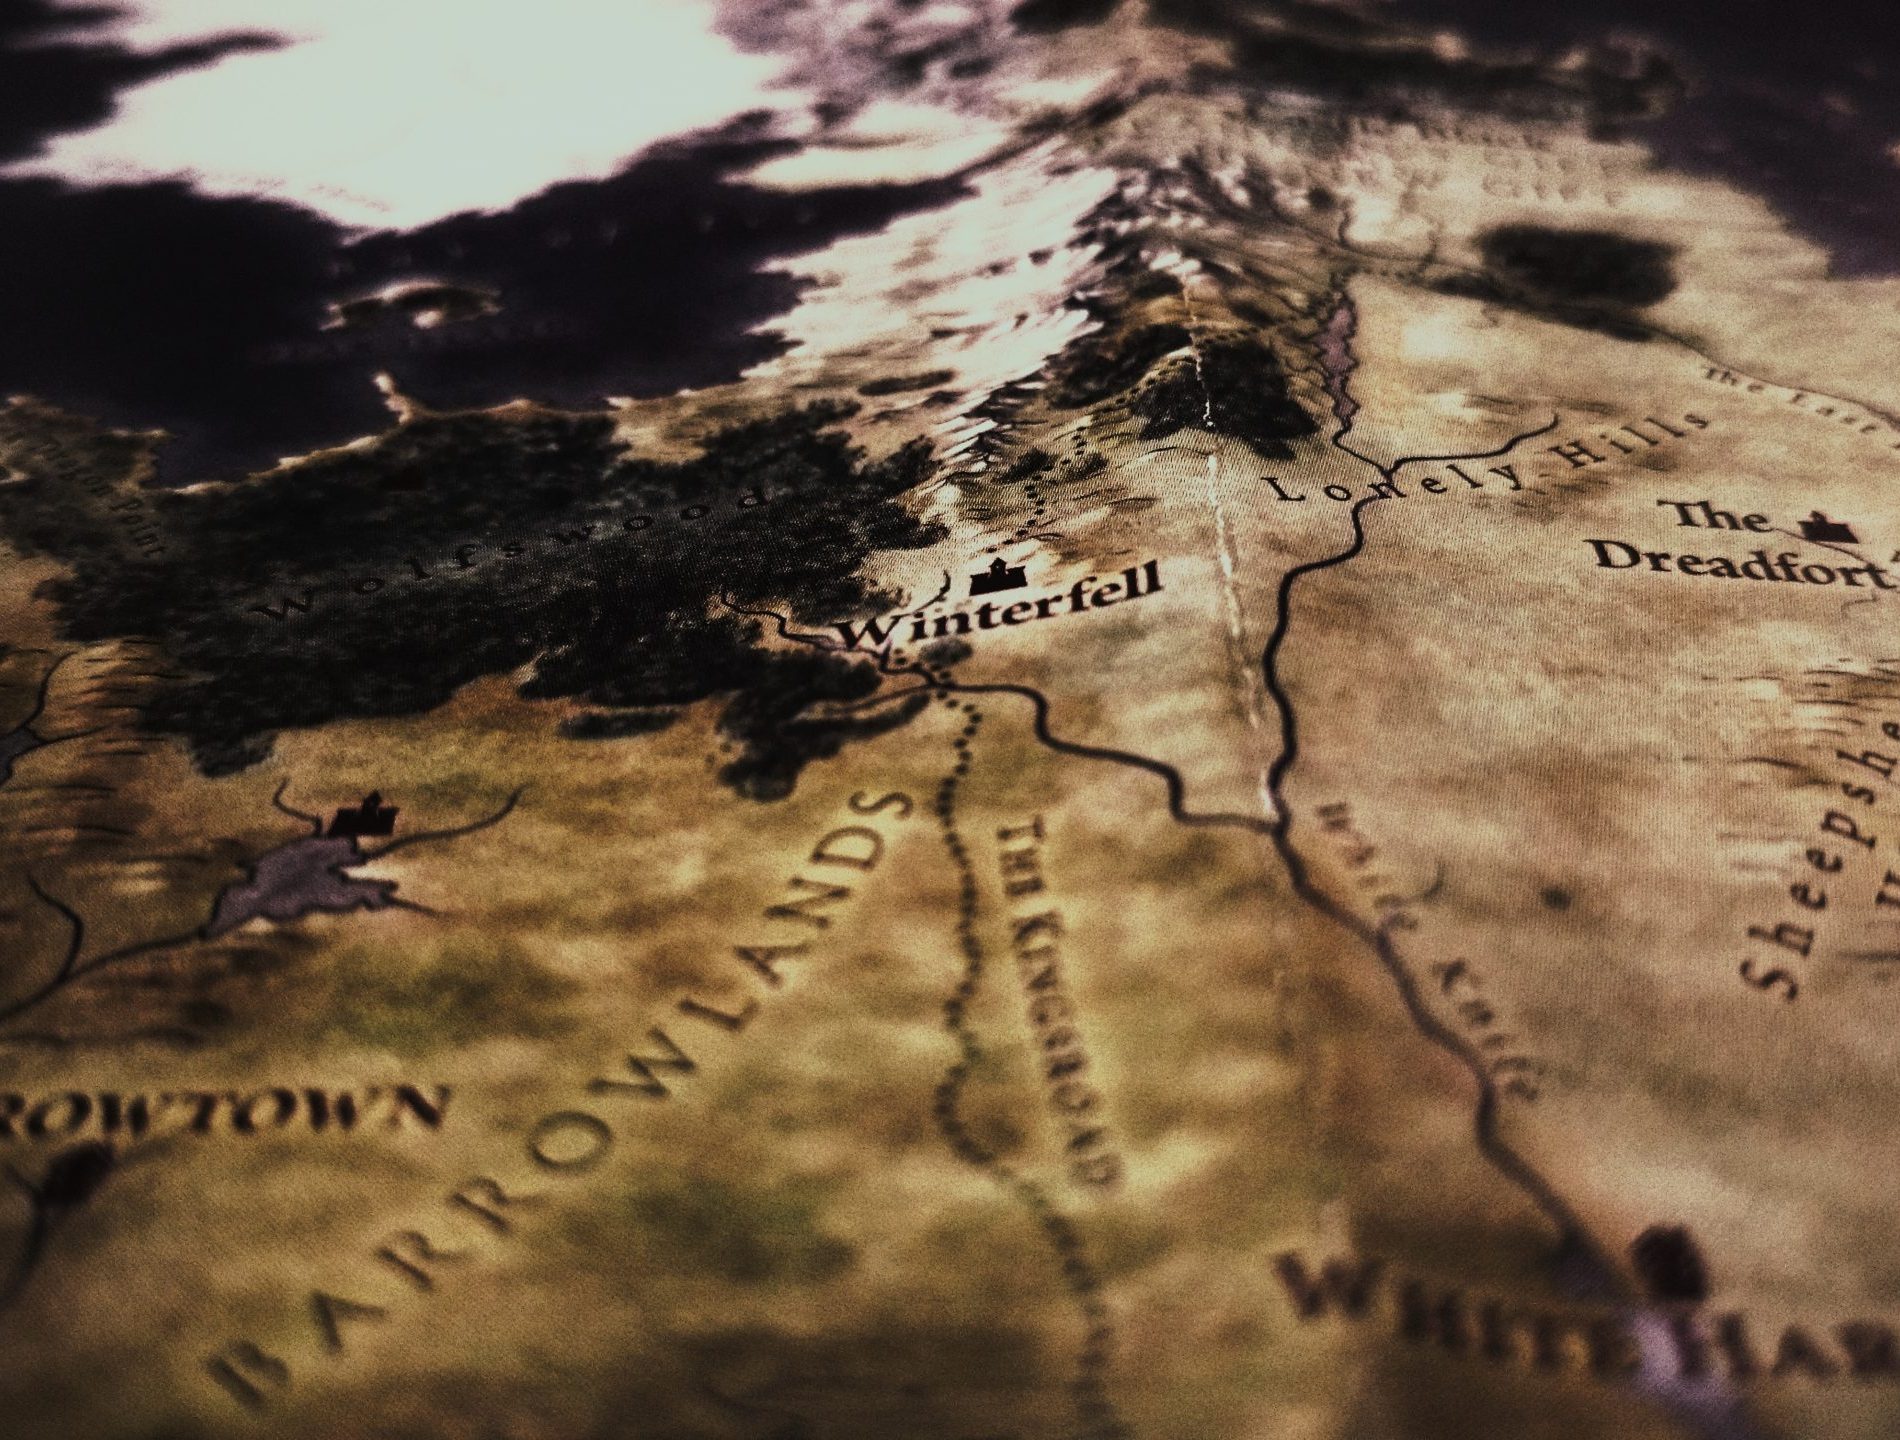 in an article about the TV series 'The House of the Dragon' we see an old map